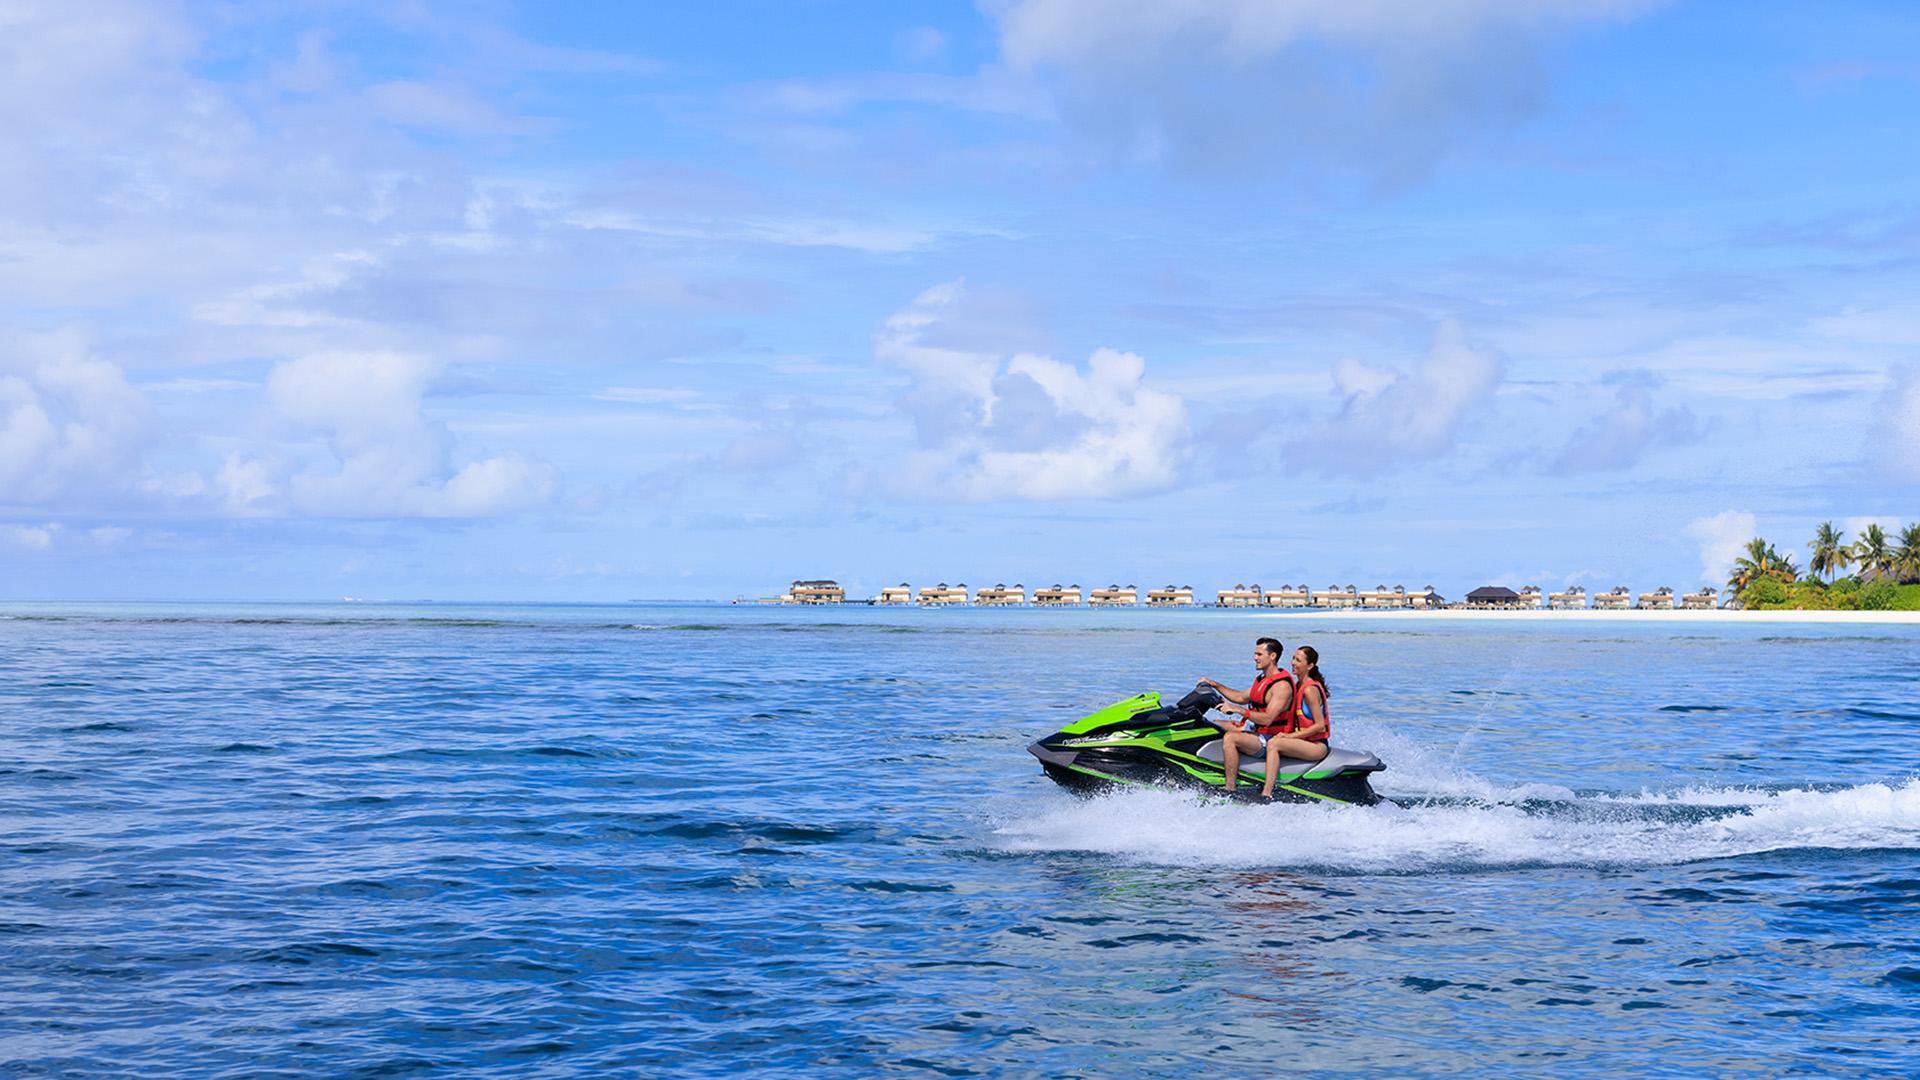 A couple enjoys a thrilling jetski ride across the turquoise waters of Angsana Velavaru in the Maldives.